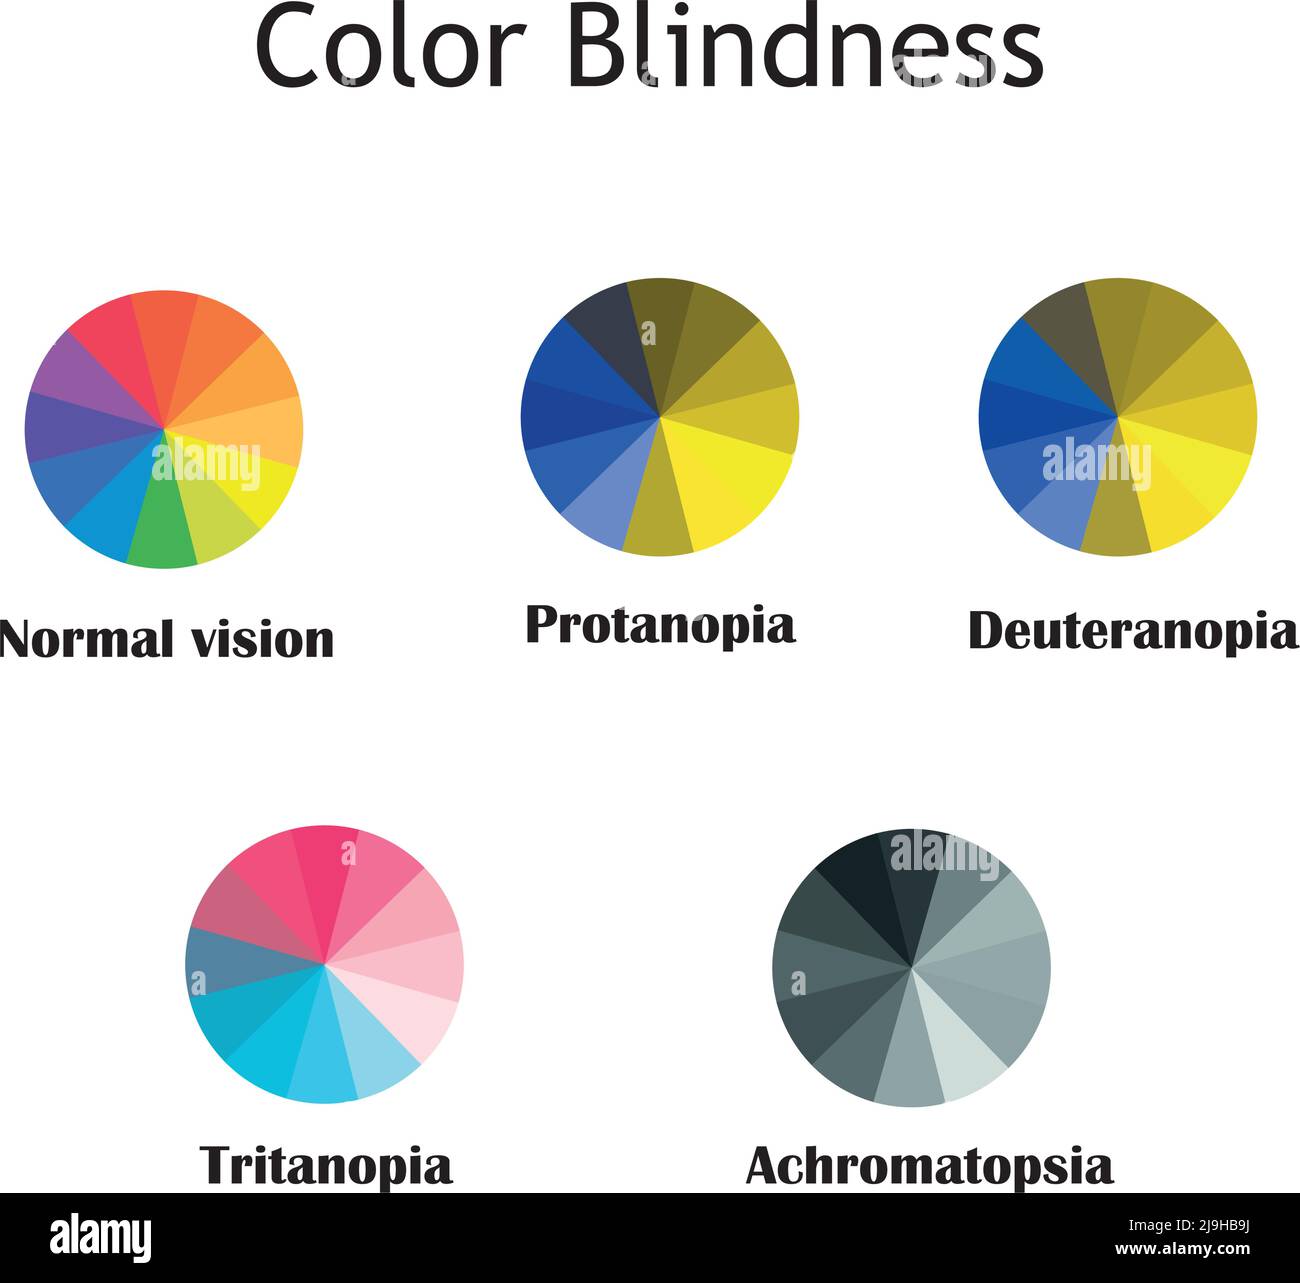 Points of view: Color blindness